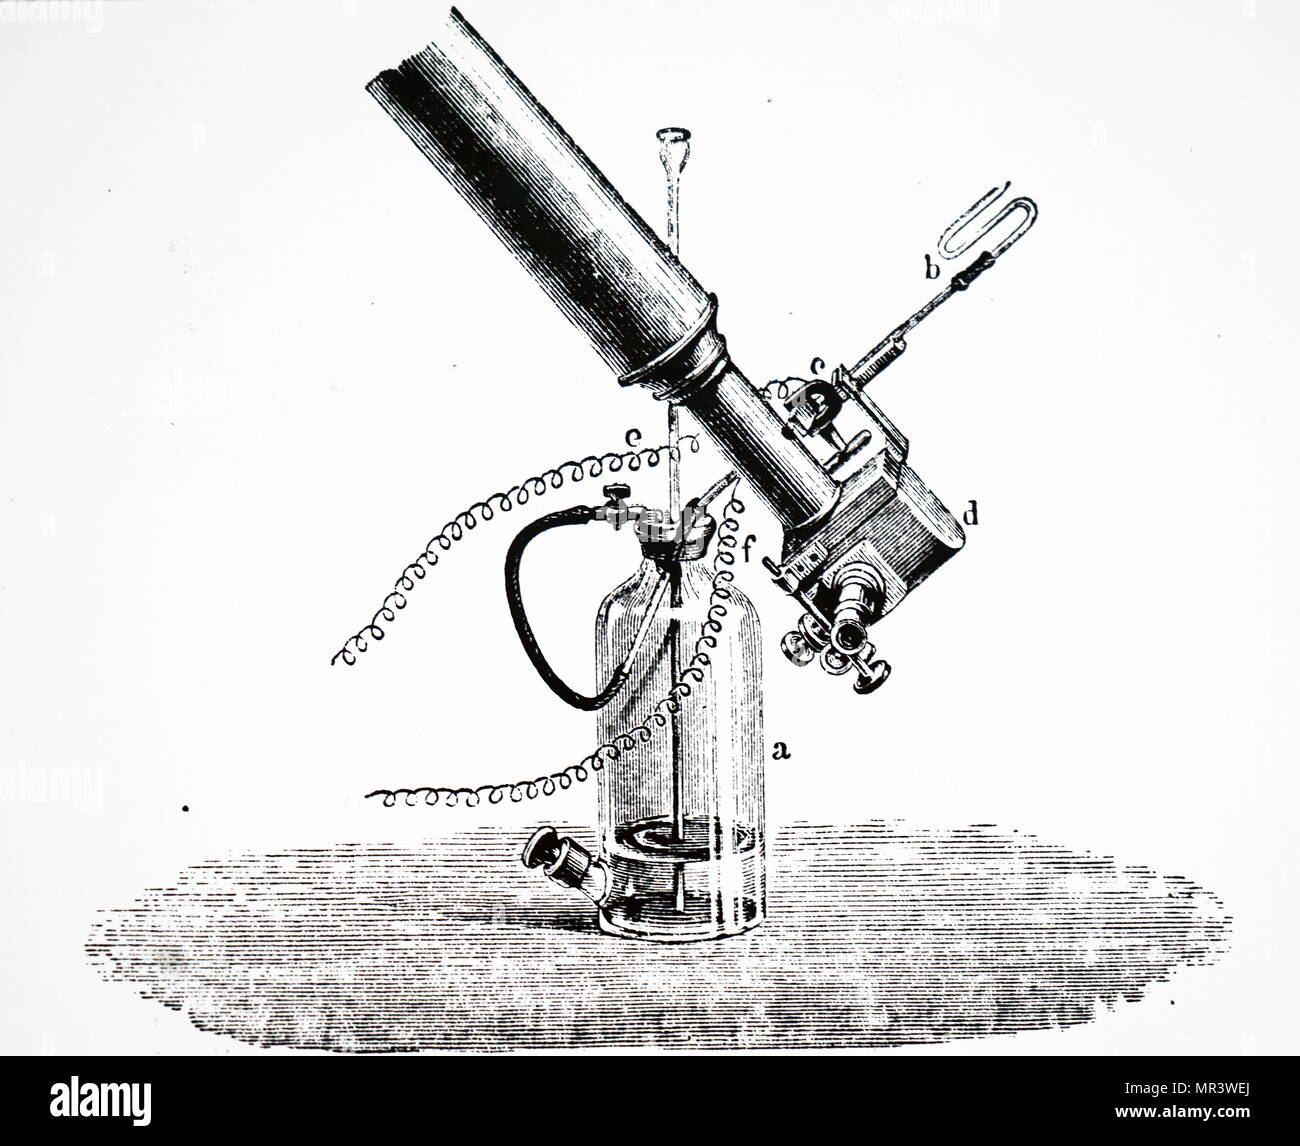 Engraving depicting William Huggins' apparatus for producing comparison spectra of hydrocarbons. This is the equipment used when studying Winnecke's comet. William Huggins (1824-1910) an English astronomer best known for his pioneering work in astronomical spectroscopy together with his wife Margaret Lindsay Huggins. Dated 19th century Stock Photo